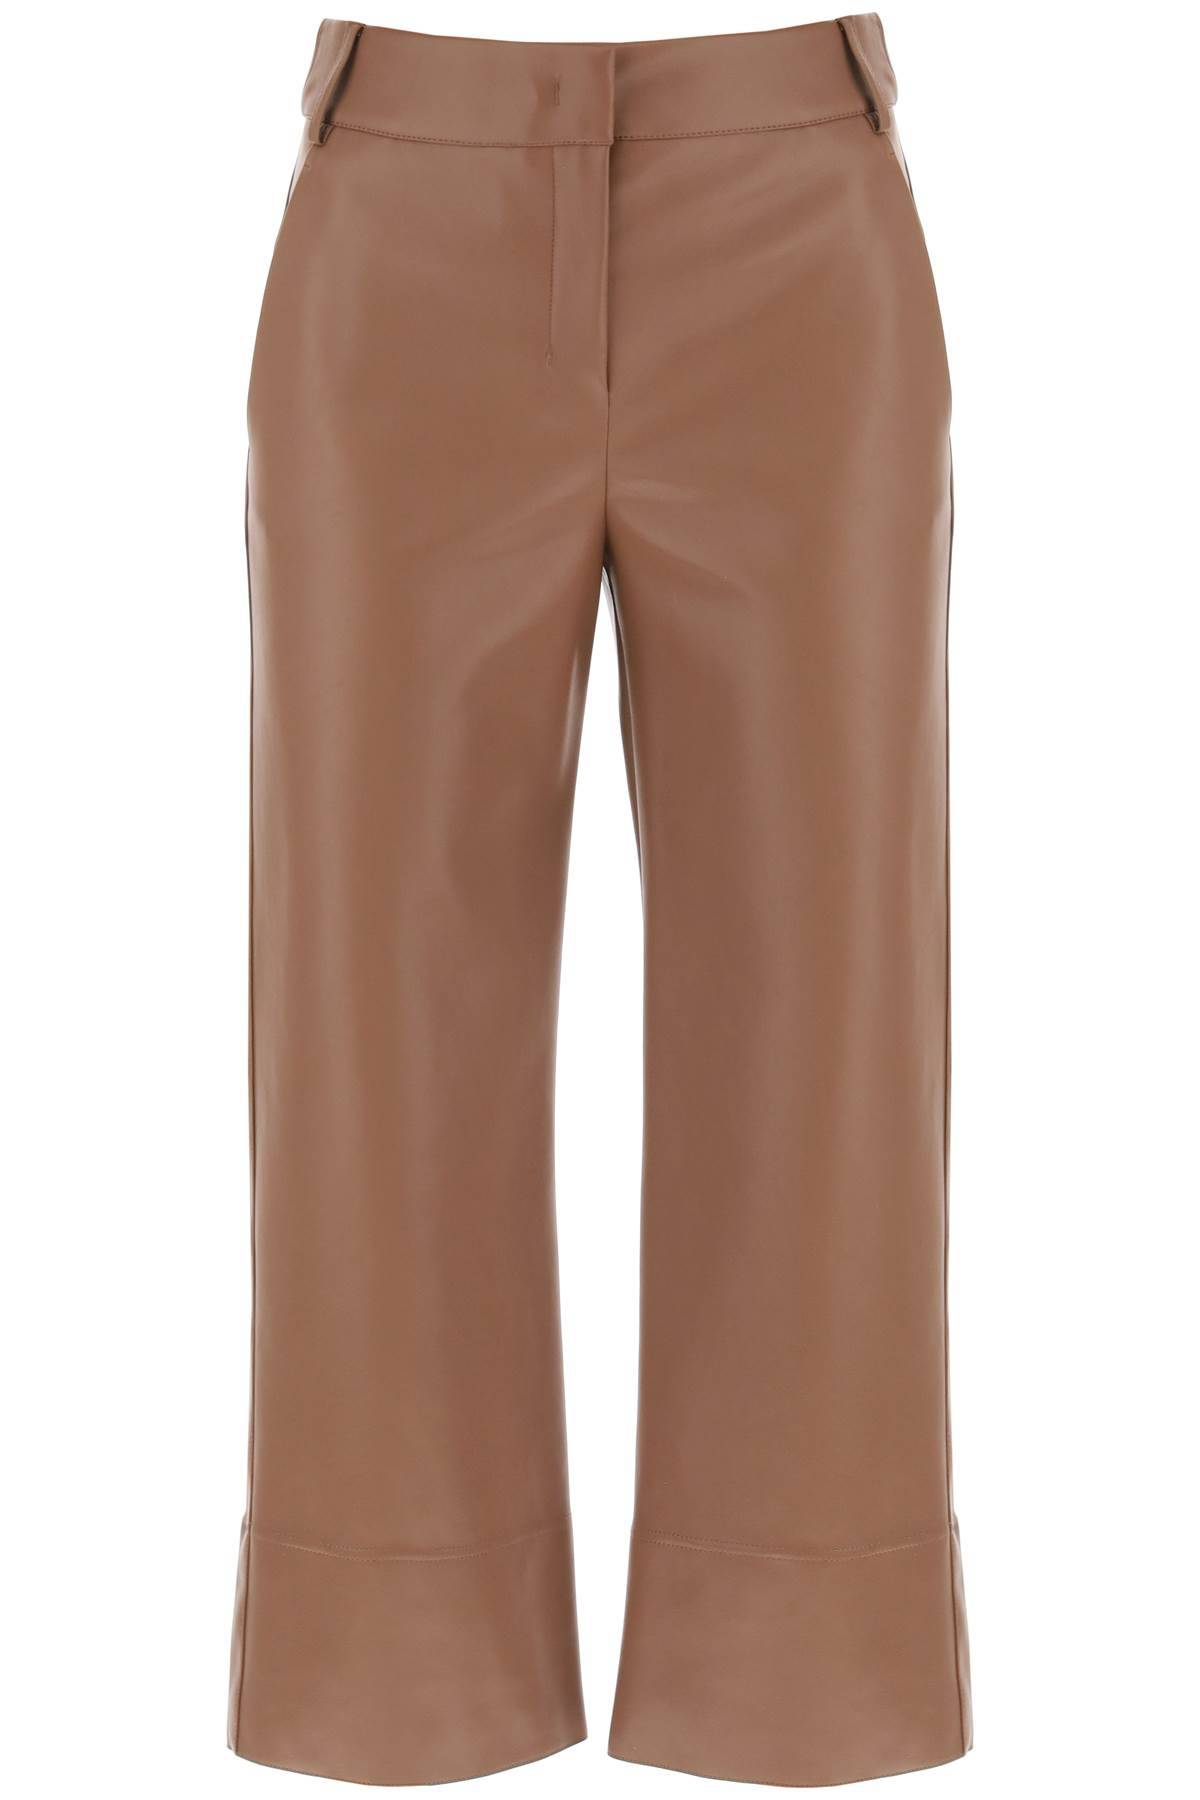 's Max Mara Soprano Faux-leather Trousers In Brown